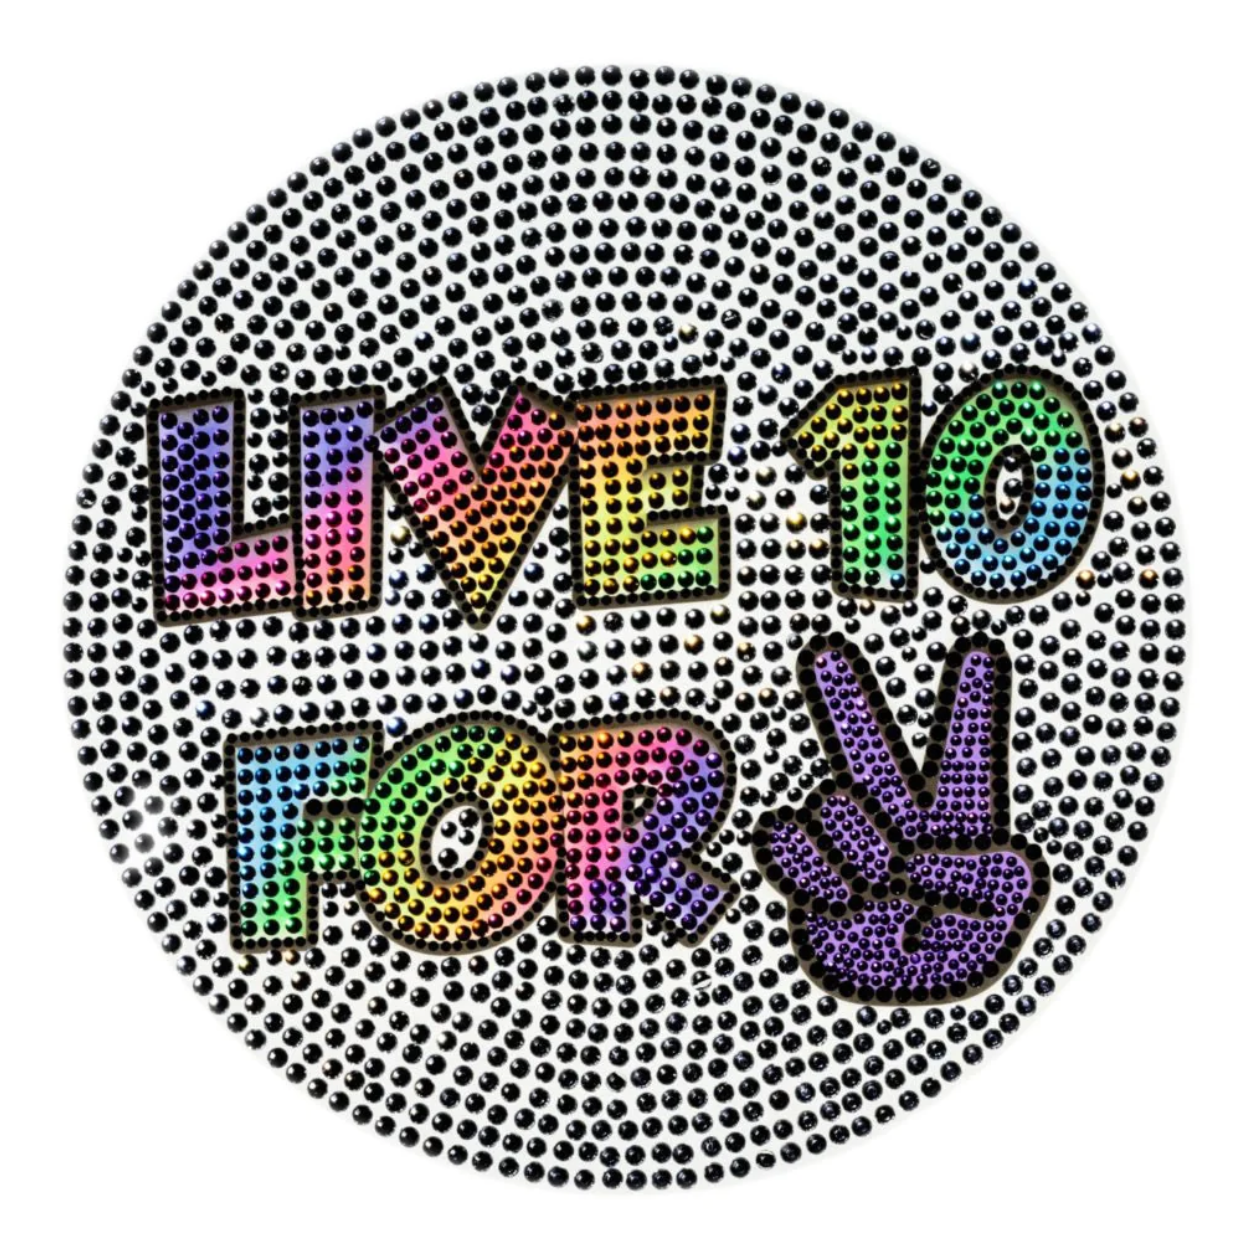 Live 10 for 2 8 in Stickerbean